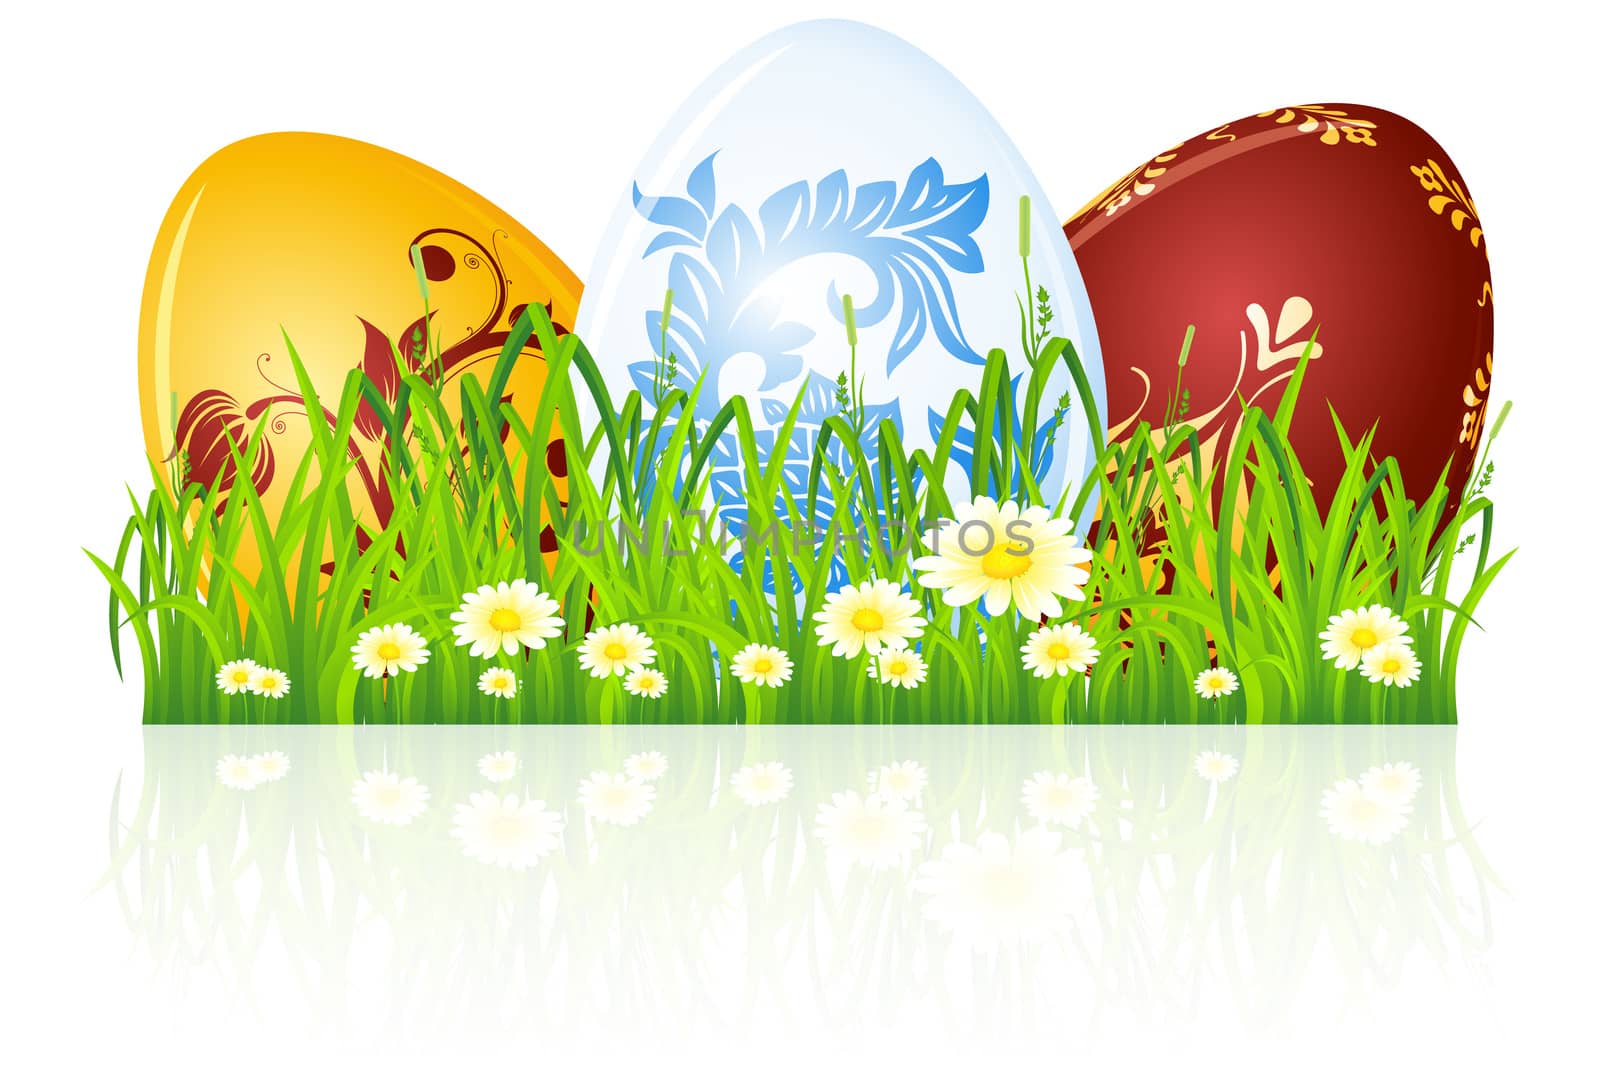 Easter eggs in the grass with flowers